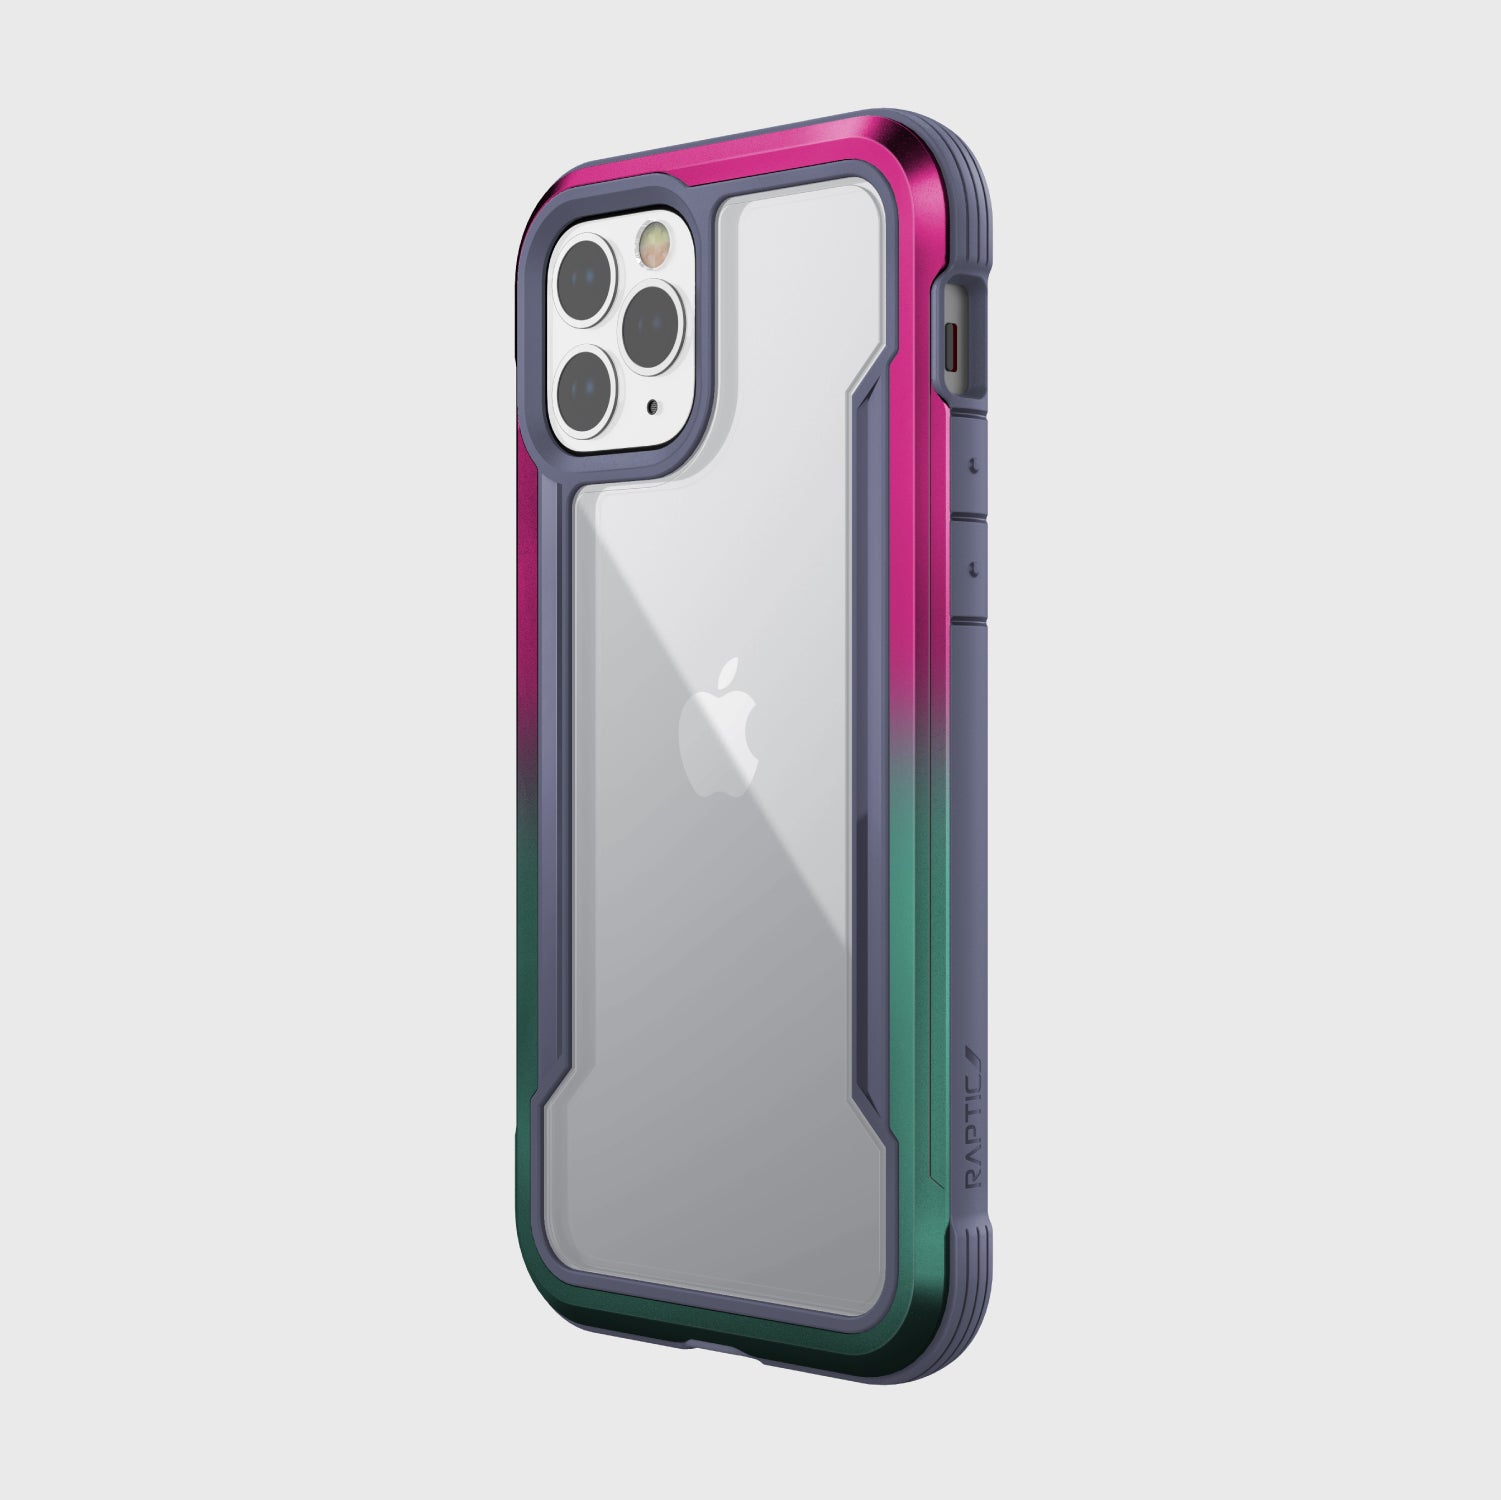 The back view of an iPhone 12 & iPhone 12 Pro case - SHIELD by Raptic in pink and green, offering protection.